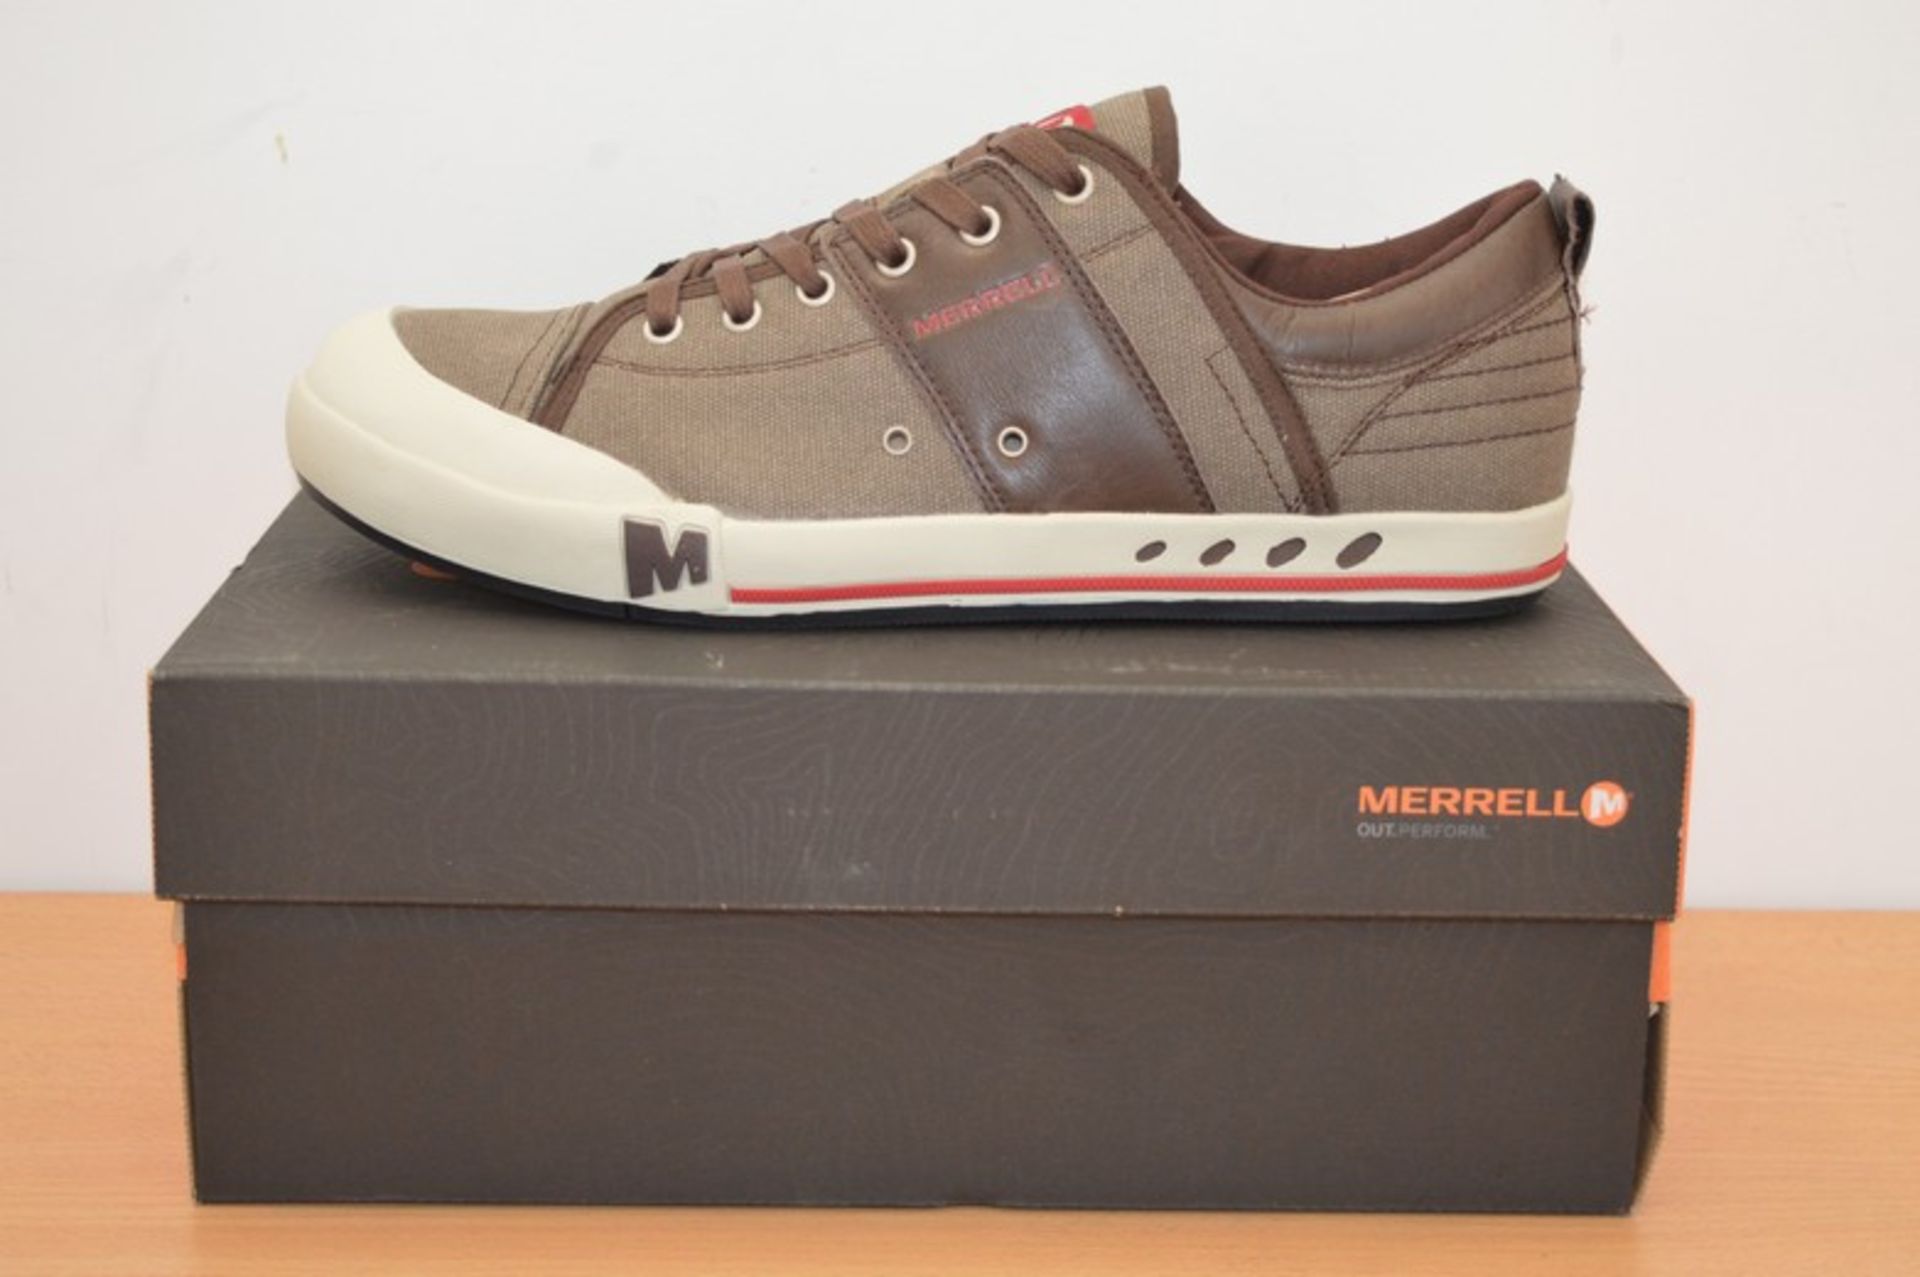 BOXED BRAND NEW MERRELL RAINT GENTS TRAINERS IN UK SIZE 11 RRP £95 (DSCLIP)(23.03.15)